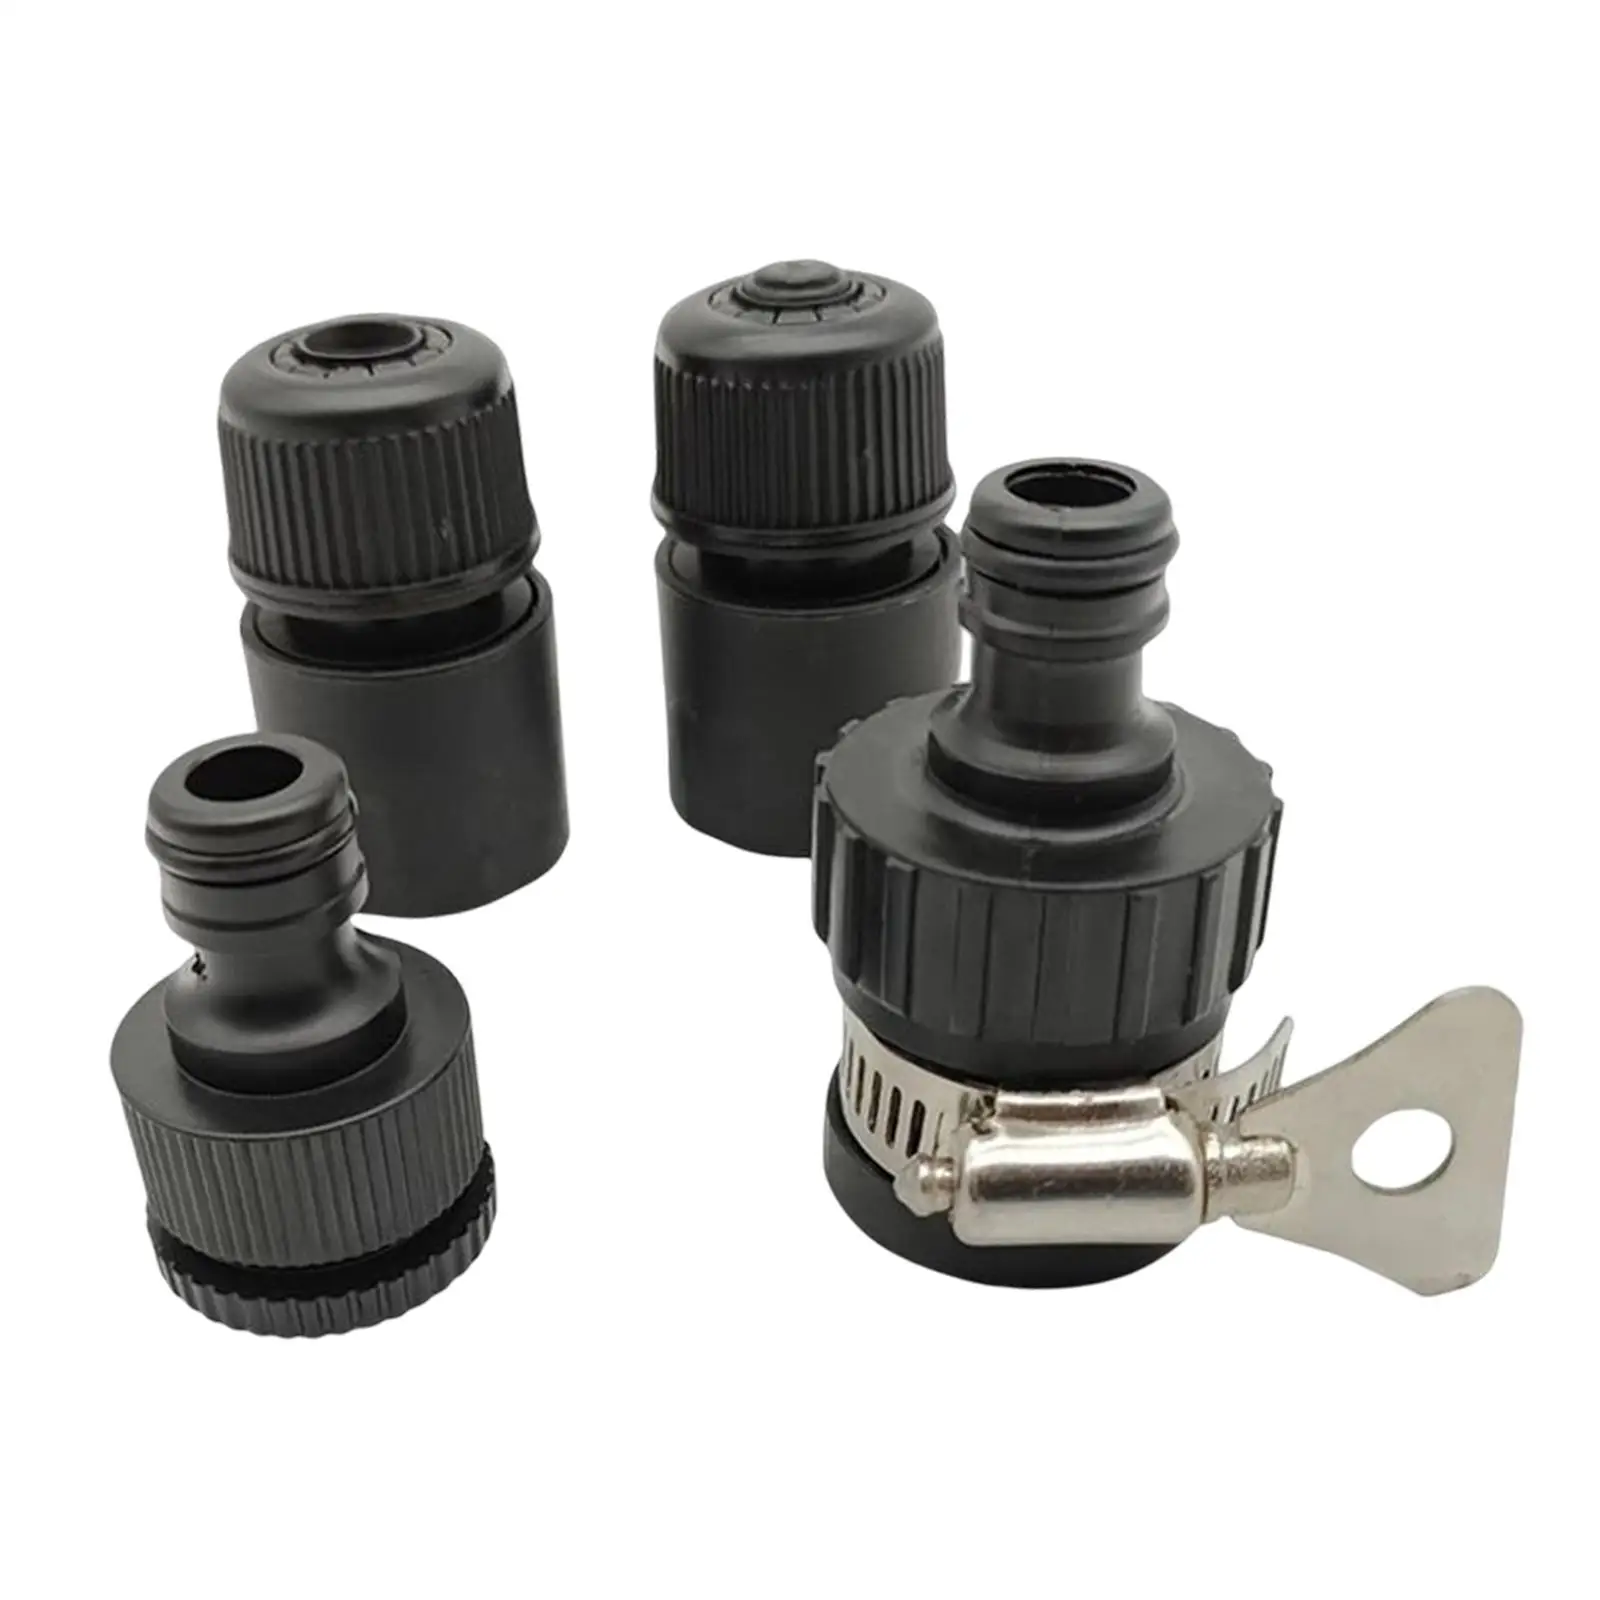 4Pcs Garden Irrigation  Connector Replacement Simple to Disassemble and Assemble Compact size fits 3/4